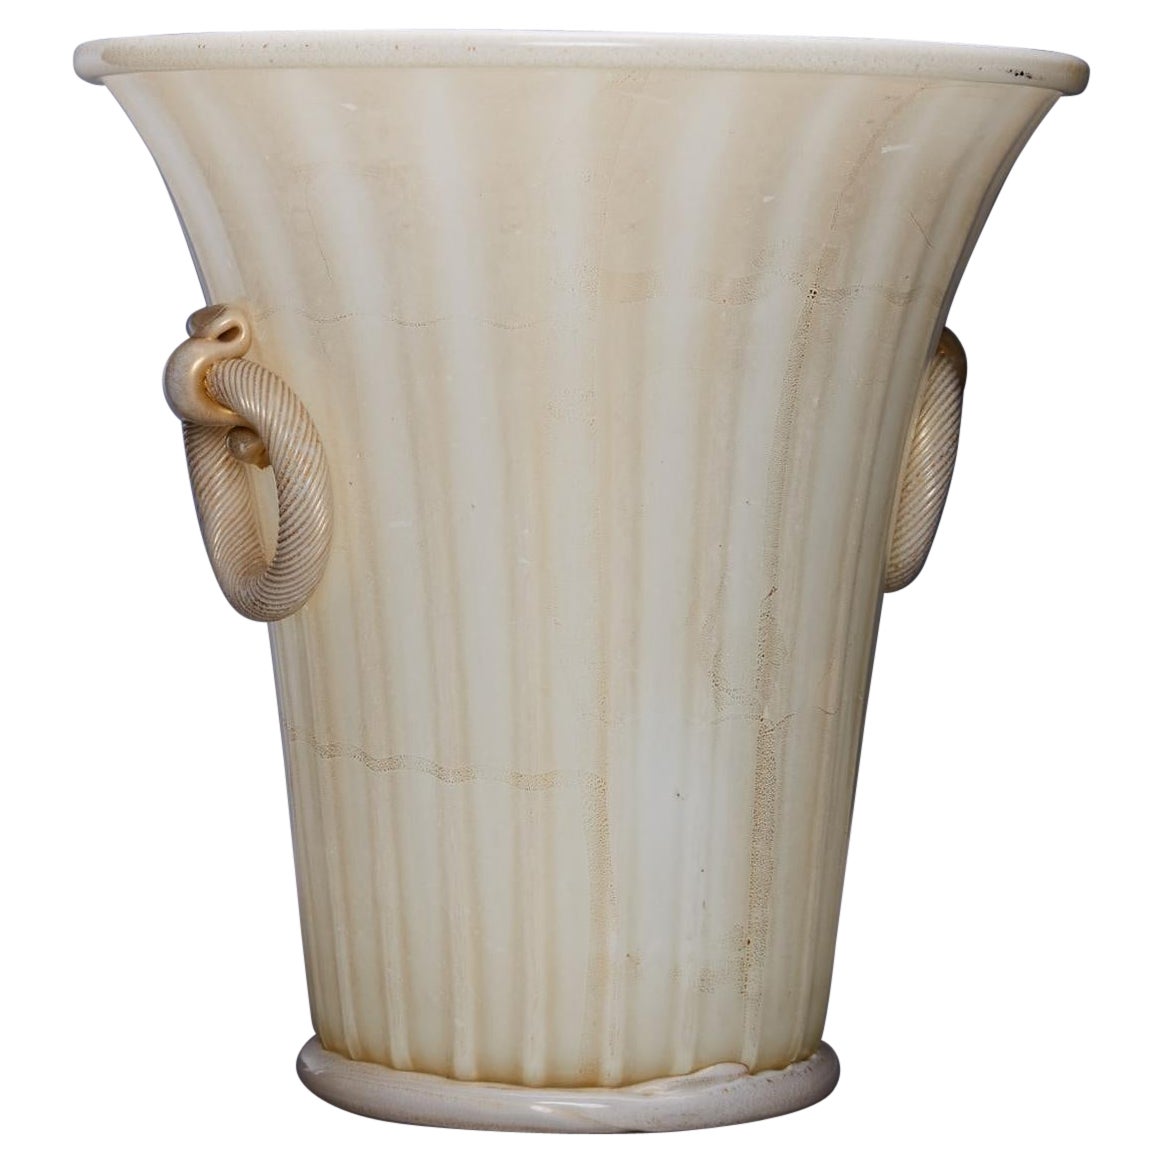 Large Twin-Handled Vase by Ercole Barovier for Barovier and Toso, 1956